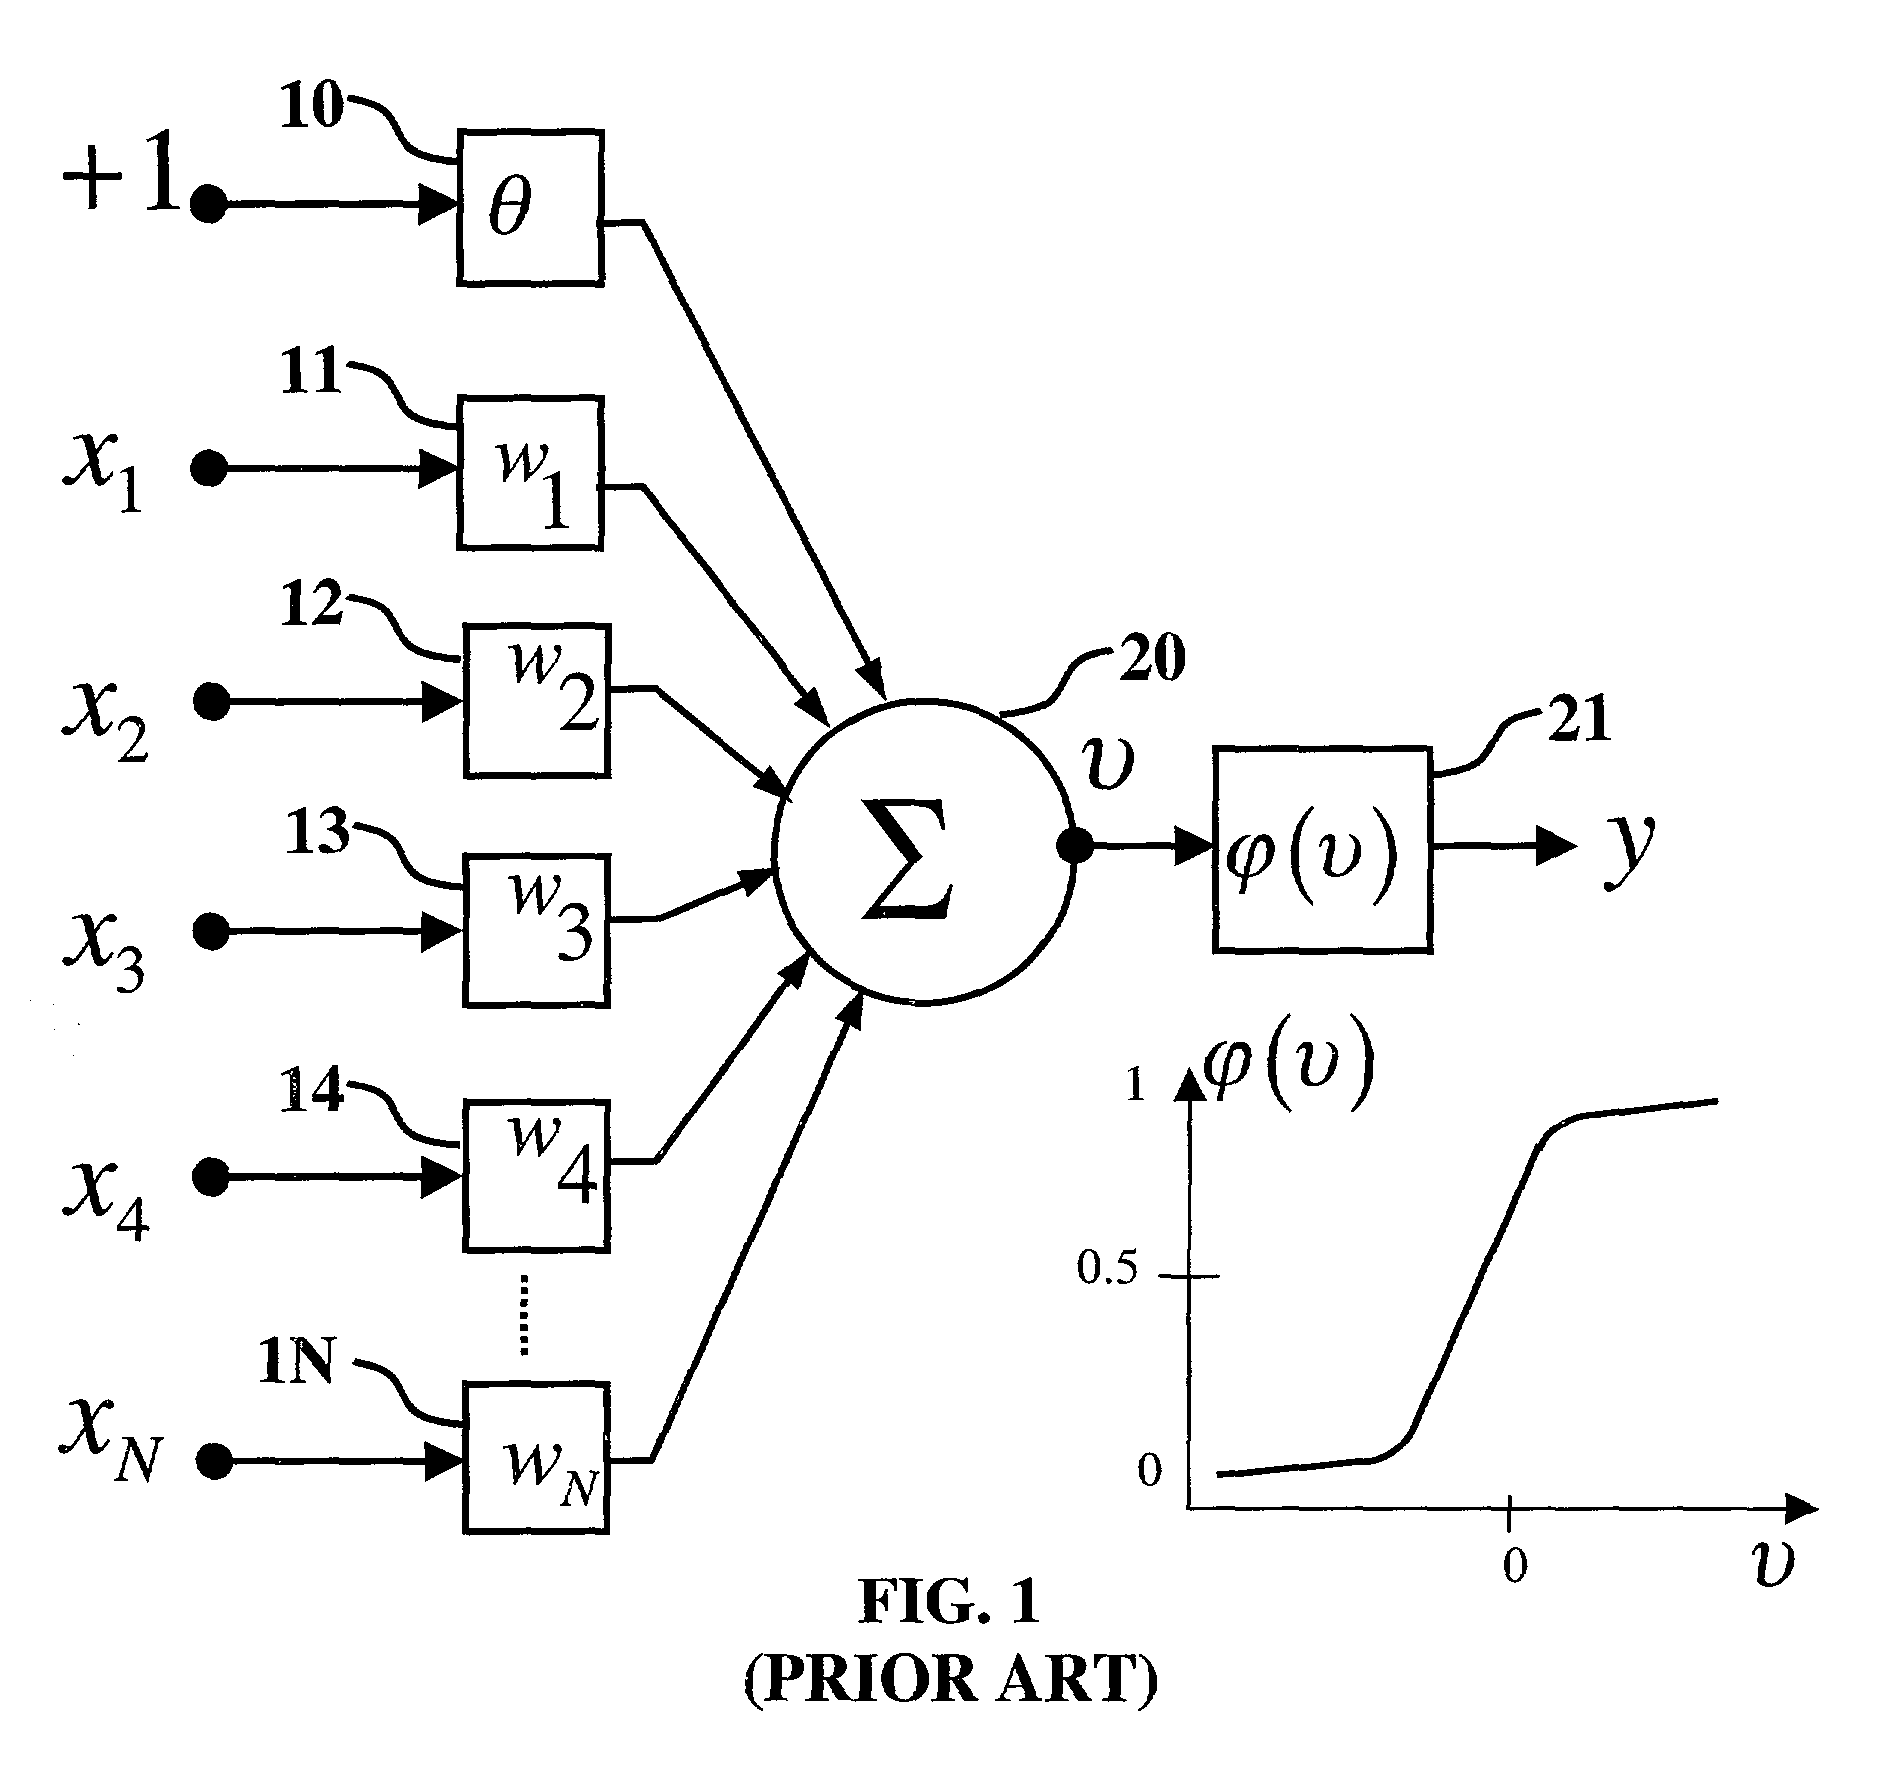 Method and apparatus for modeling a neural synapse function by utilizing a single conventional MOSFET